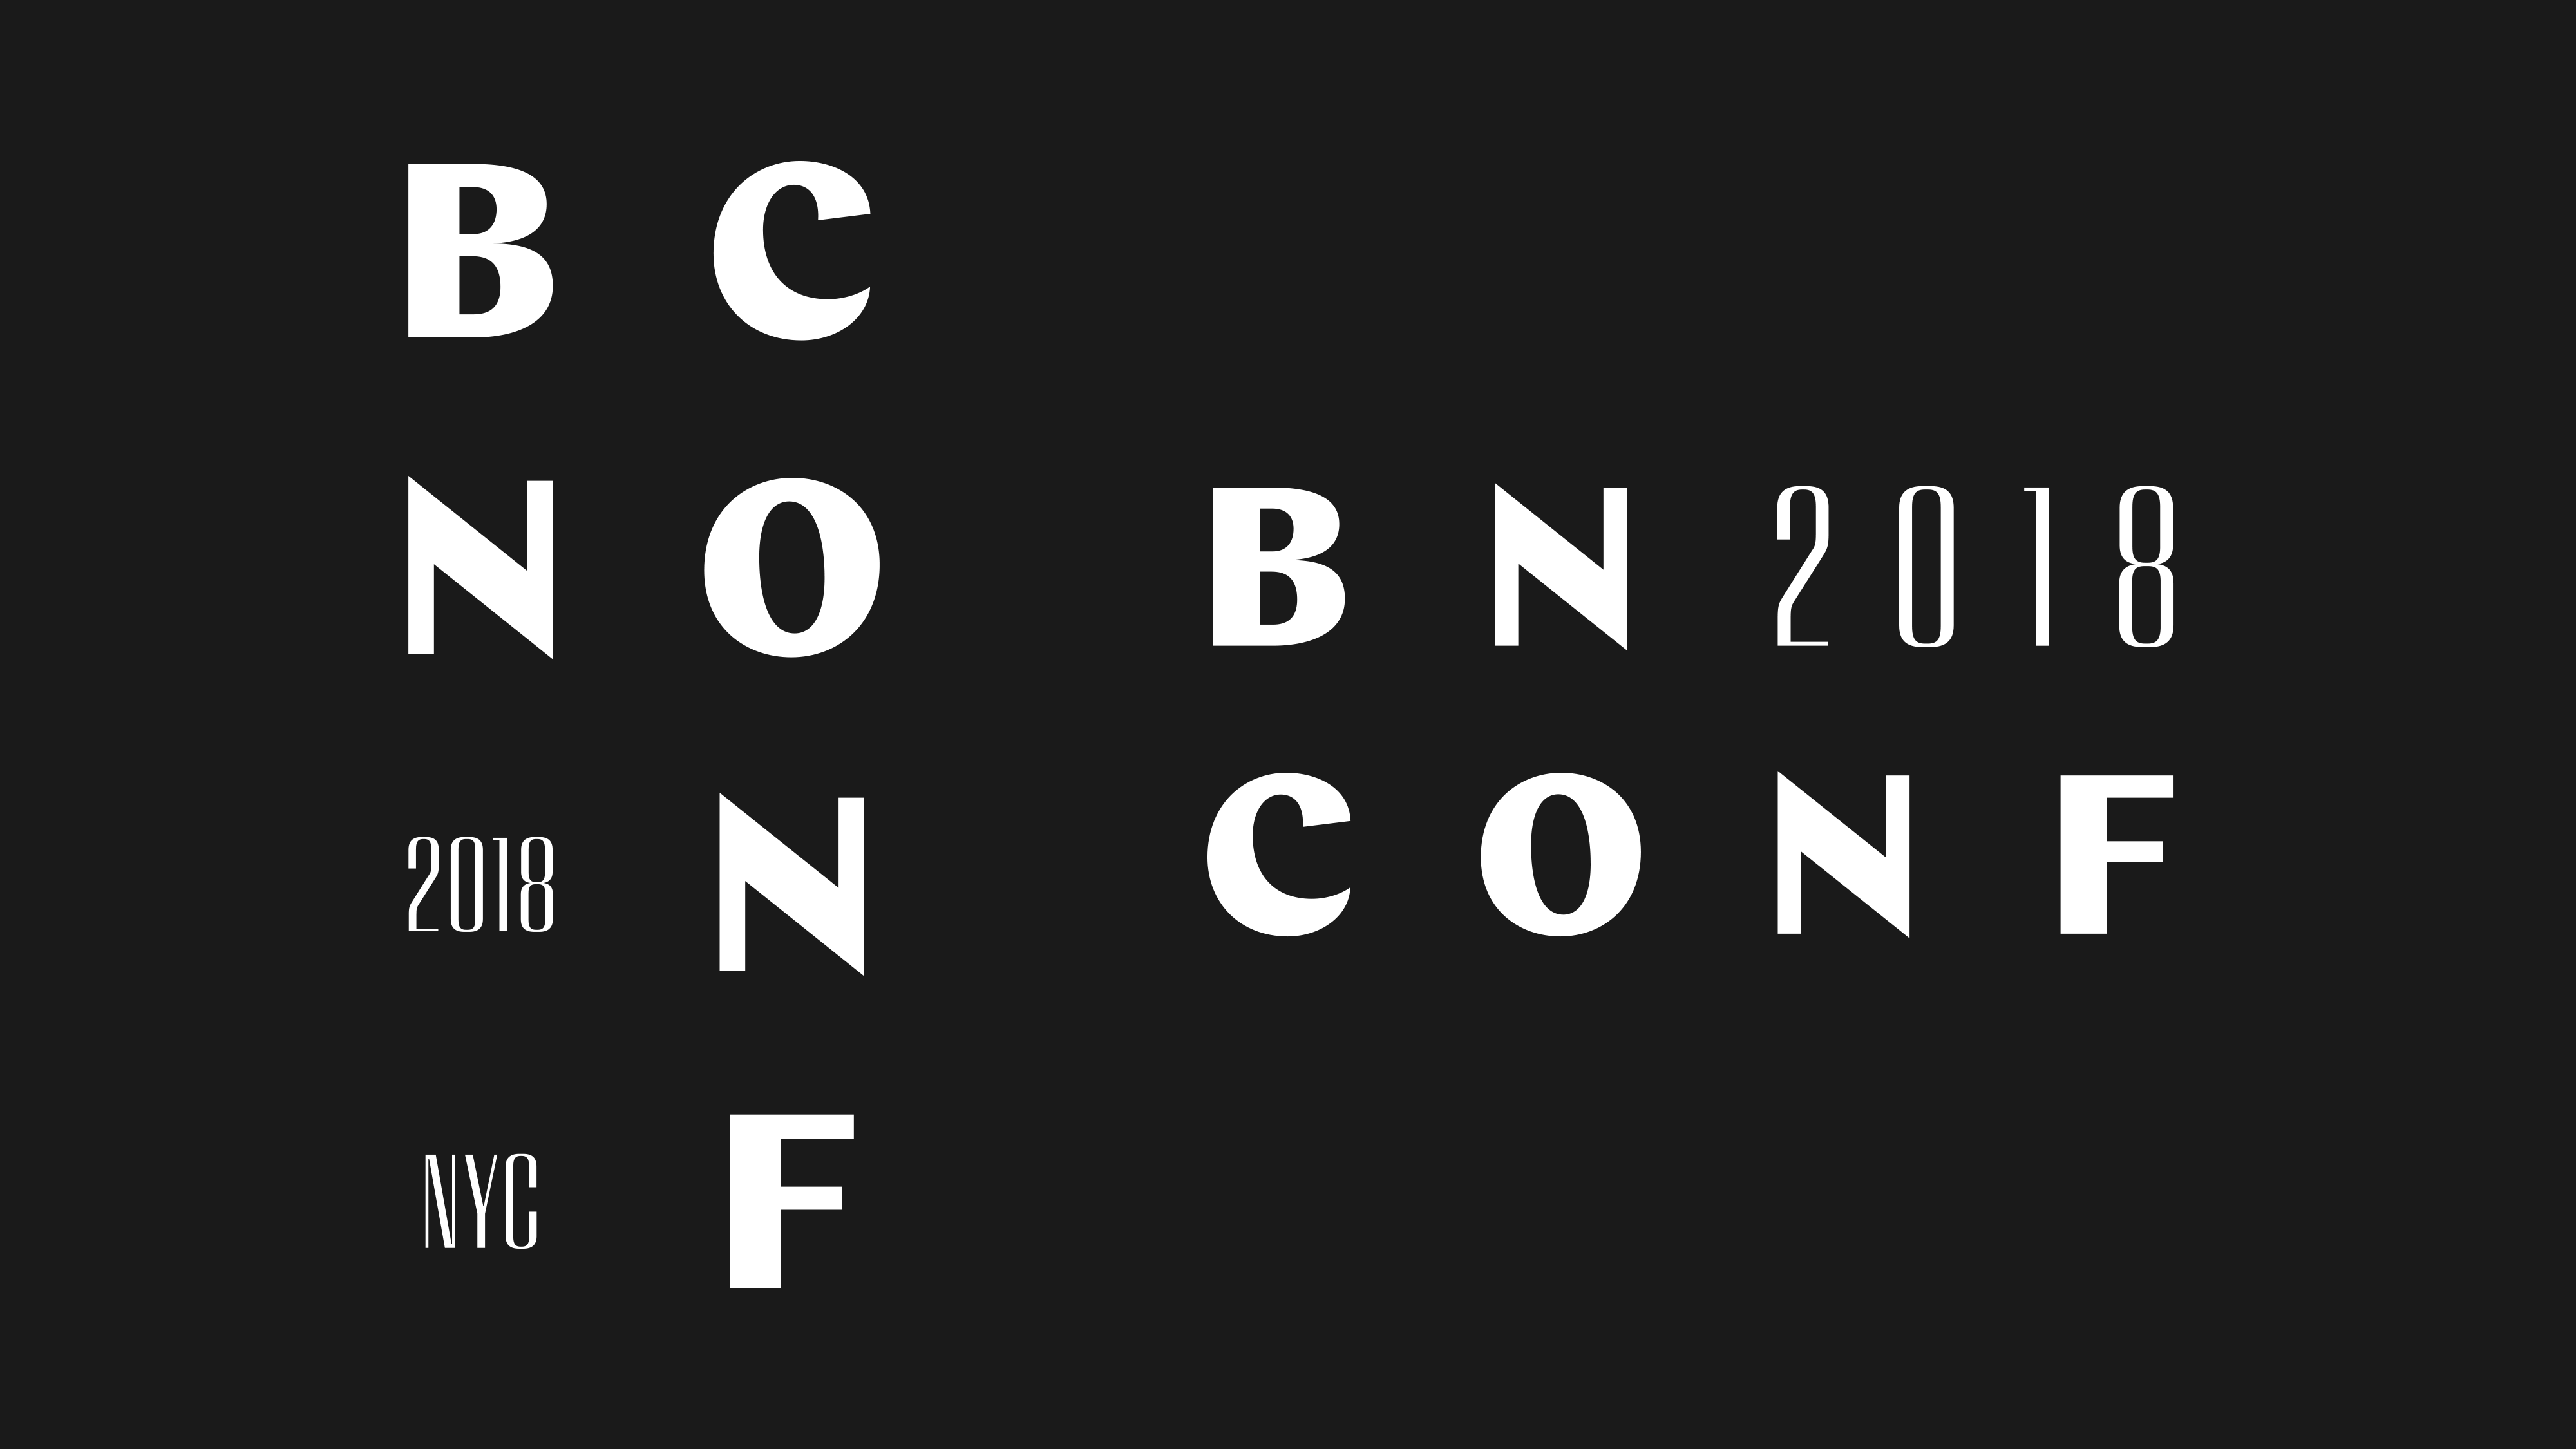 2018 Brand New Conference Identity